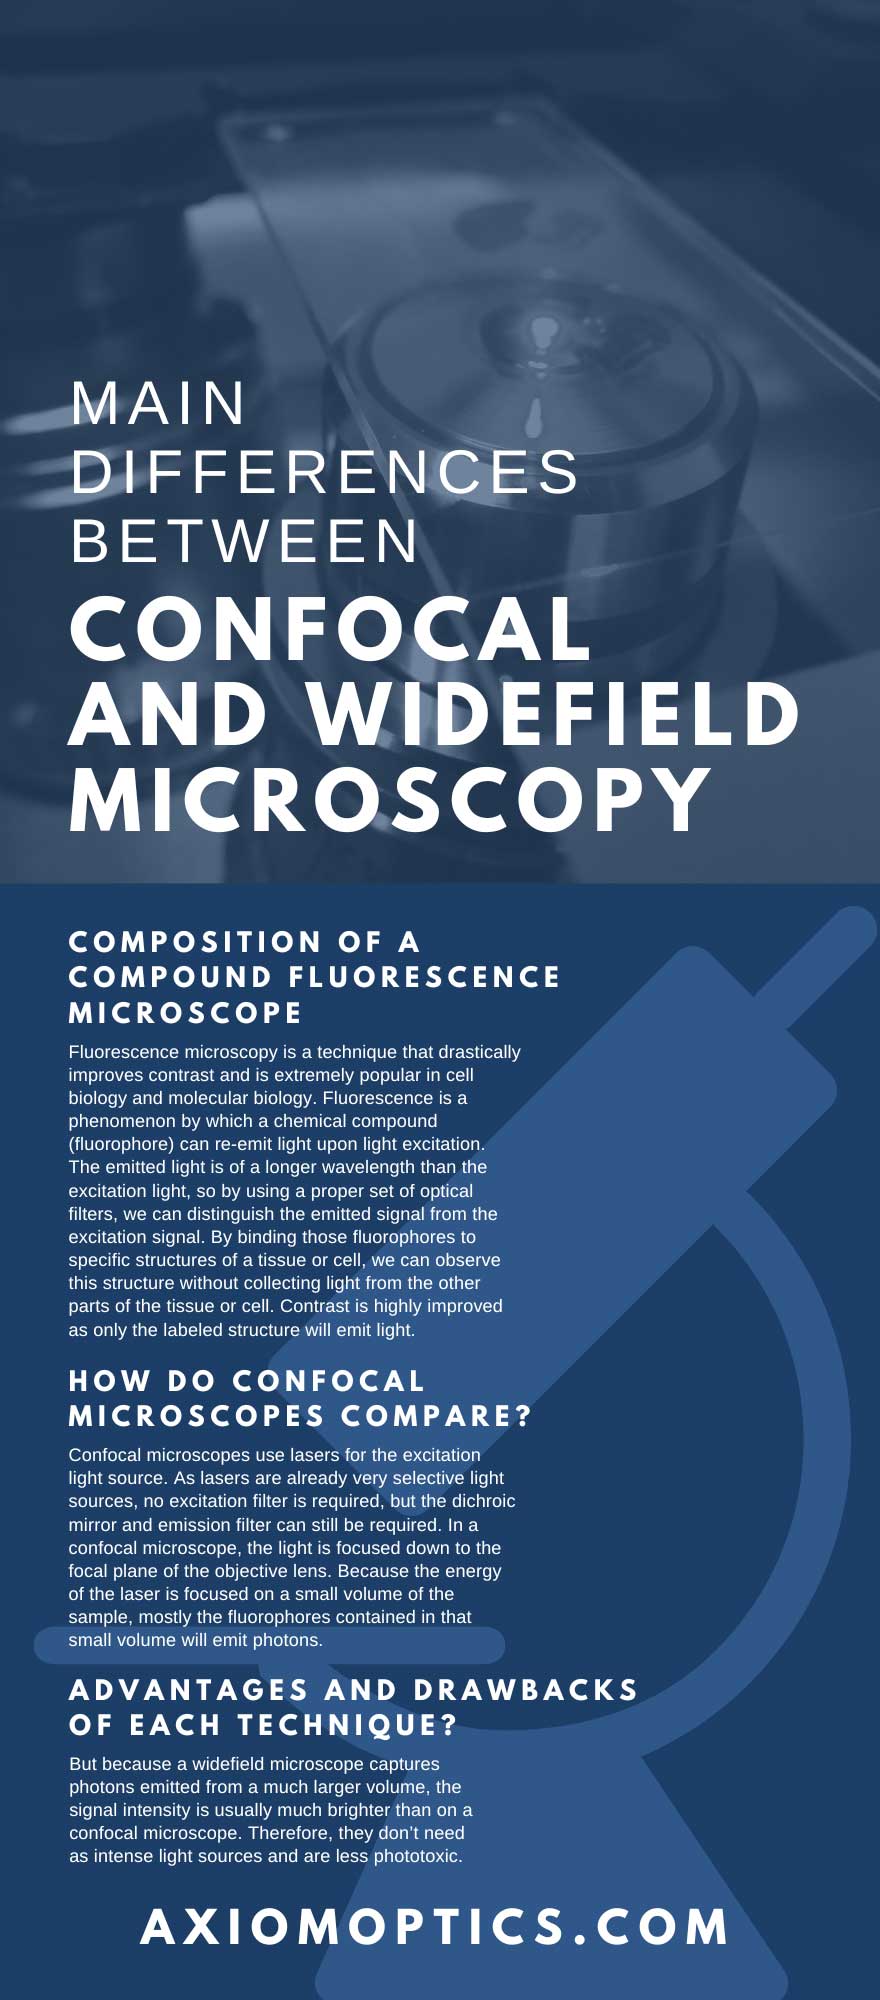 Main Differences Between Confocal and Widefield Microscopy